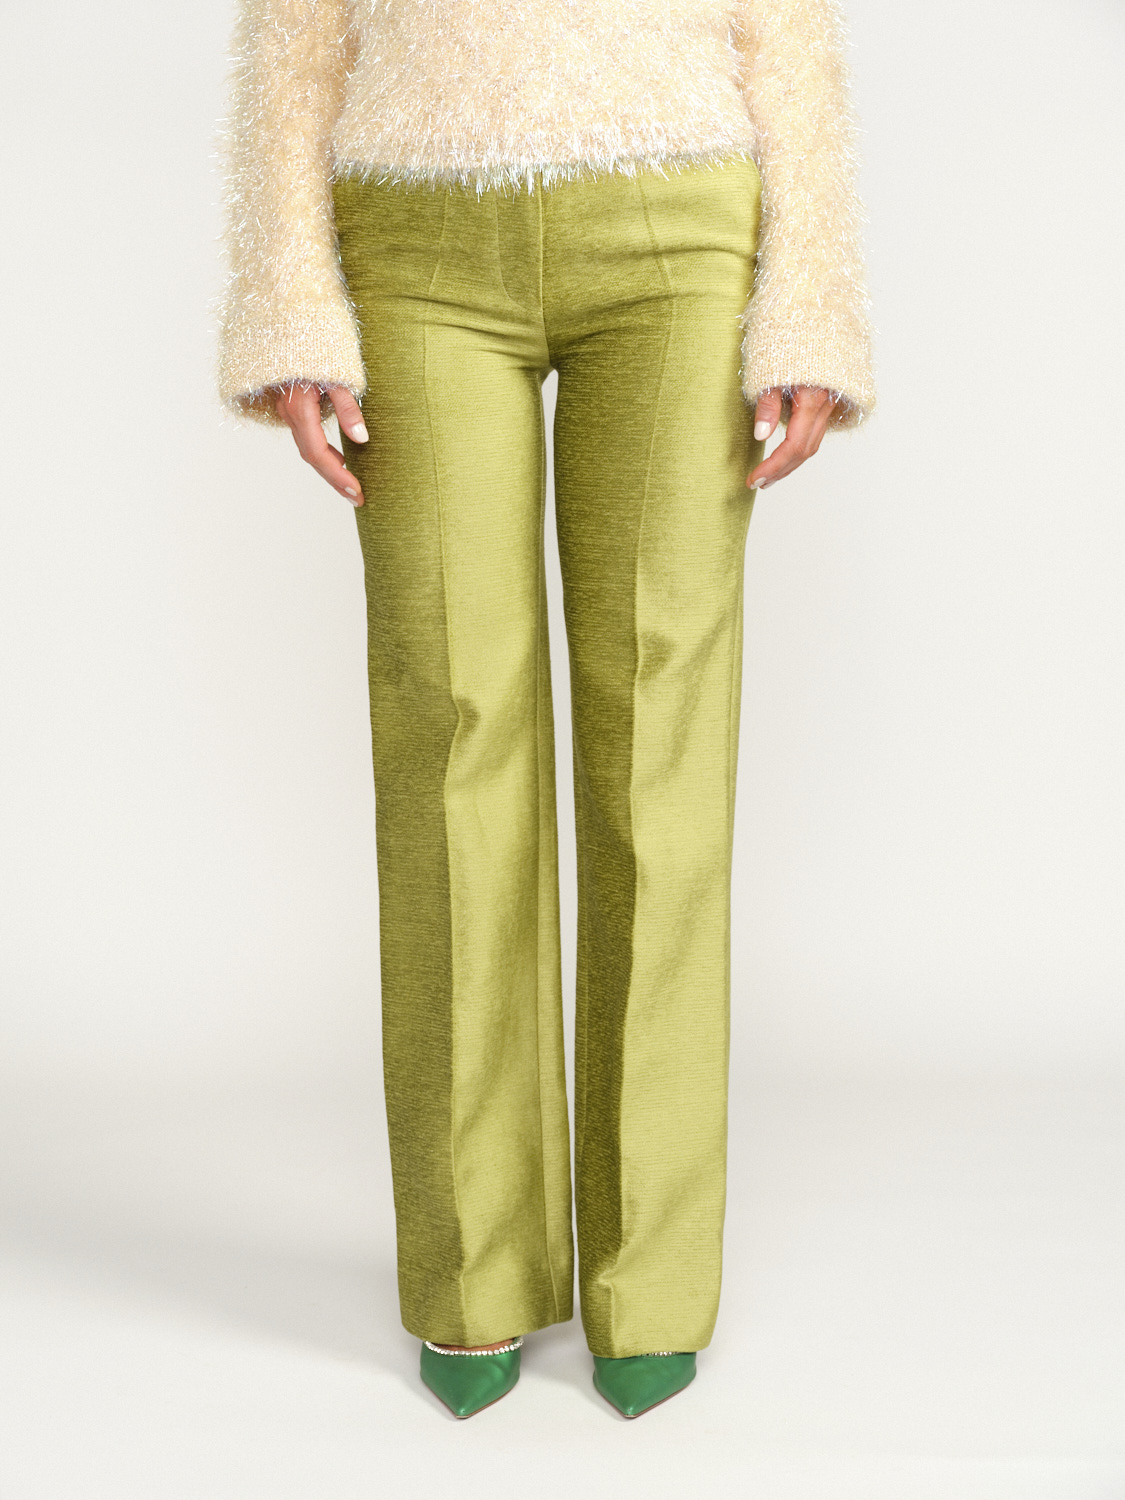 Victoria Beckham Lux Chenille Tailored Trousers - Suit style trousers with wide leg green 36